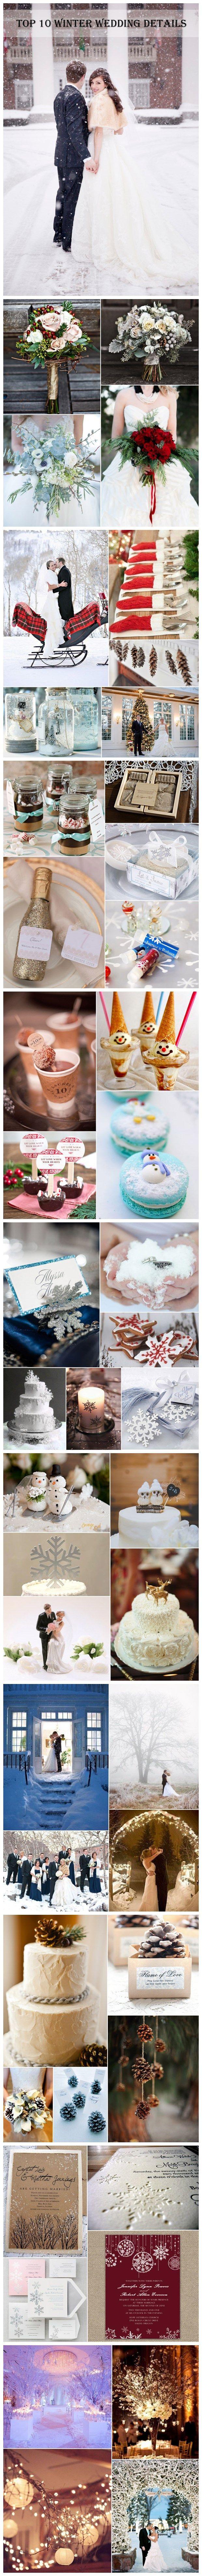 Mariage - Top 10 Winter Wedding Ideas & Quirky Details 2014